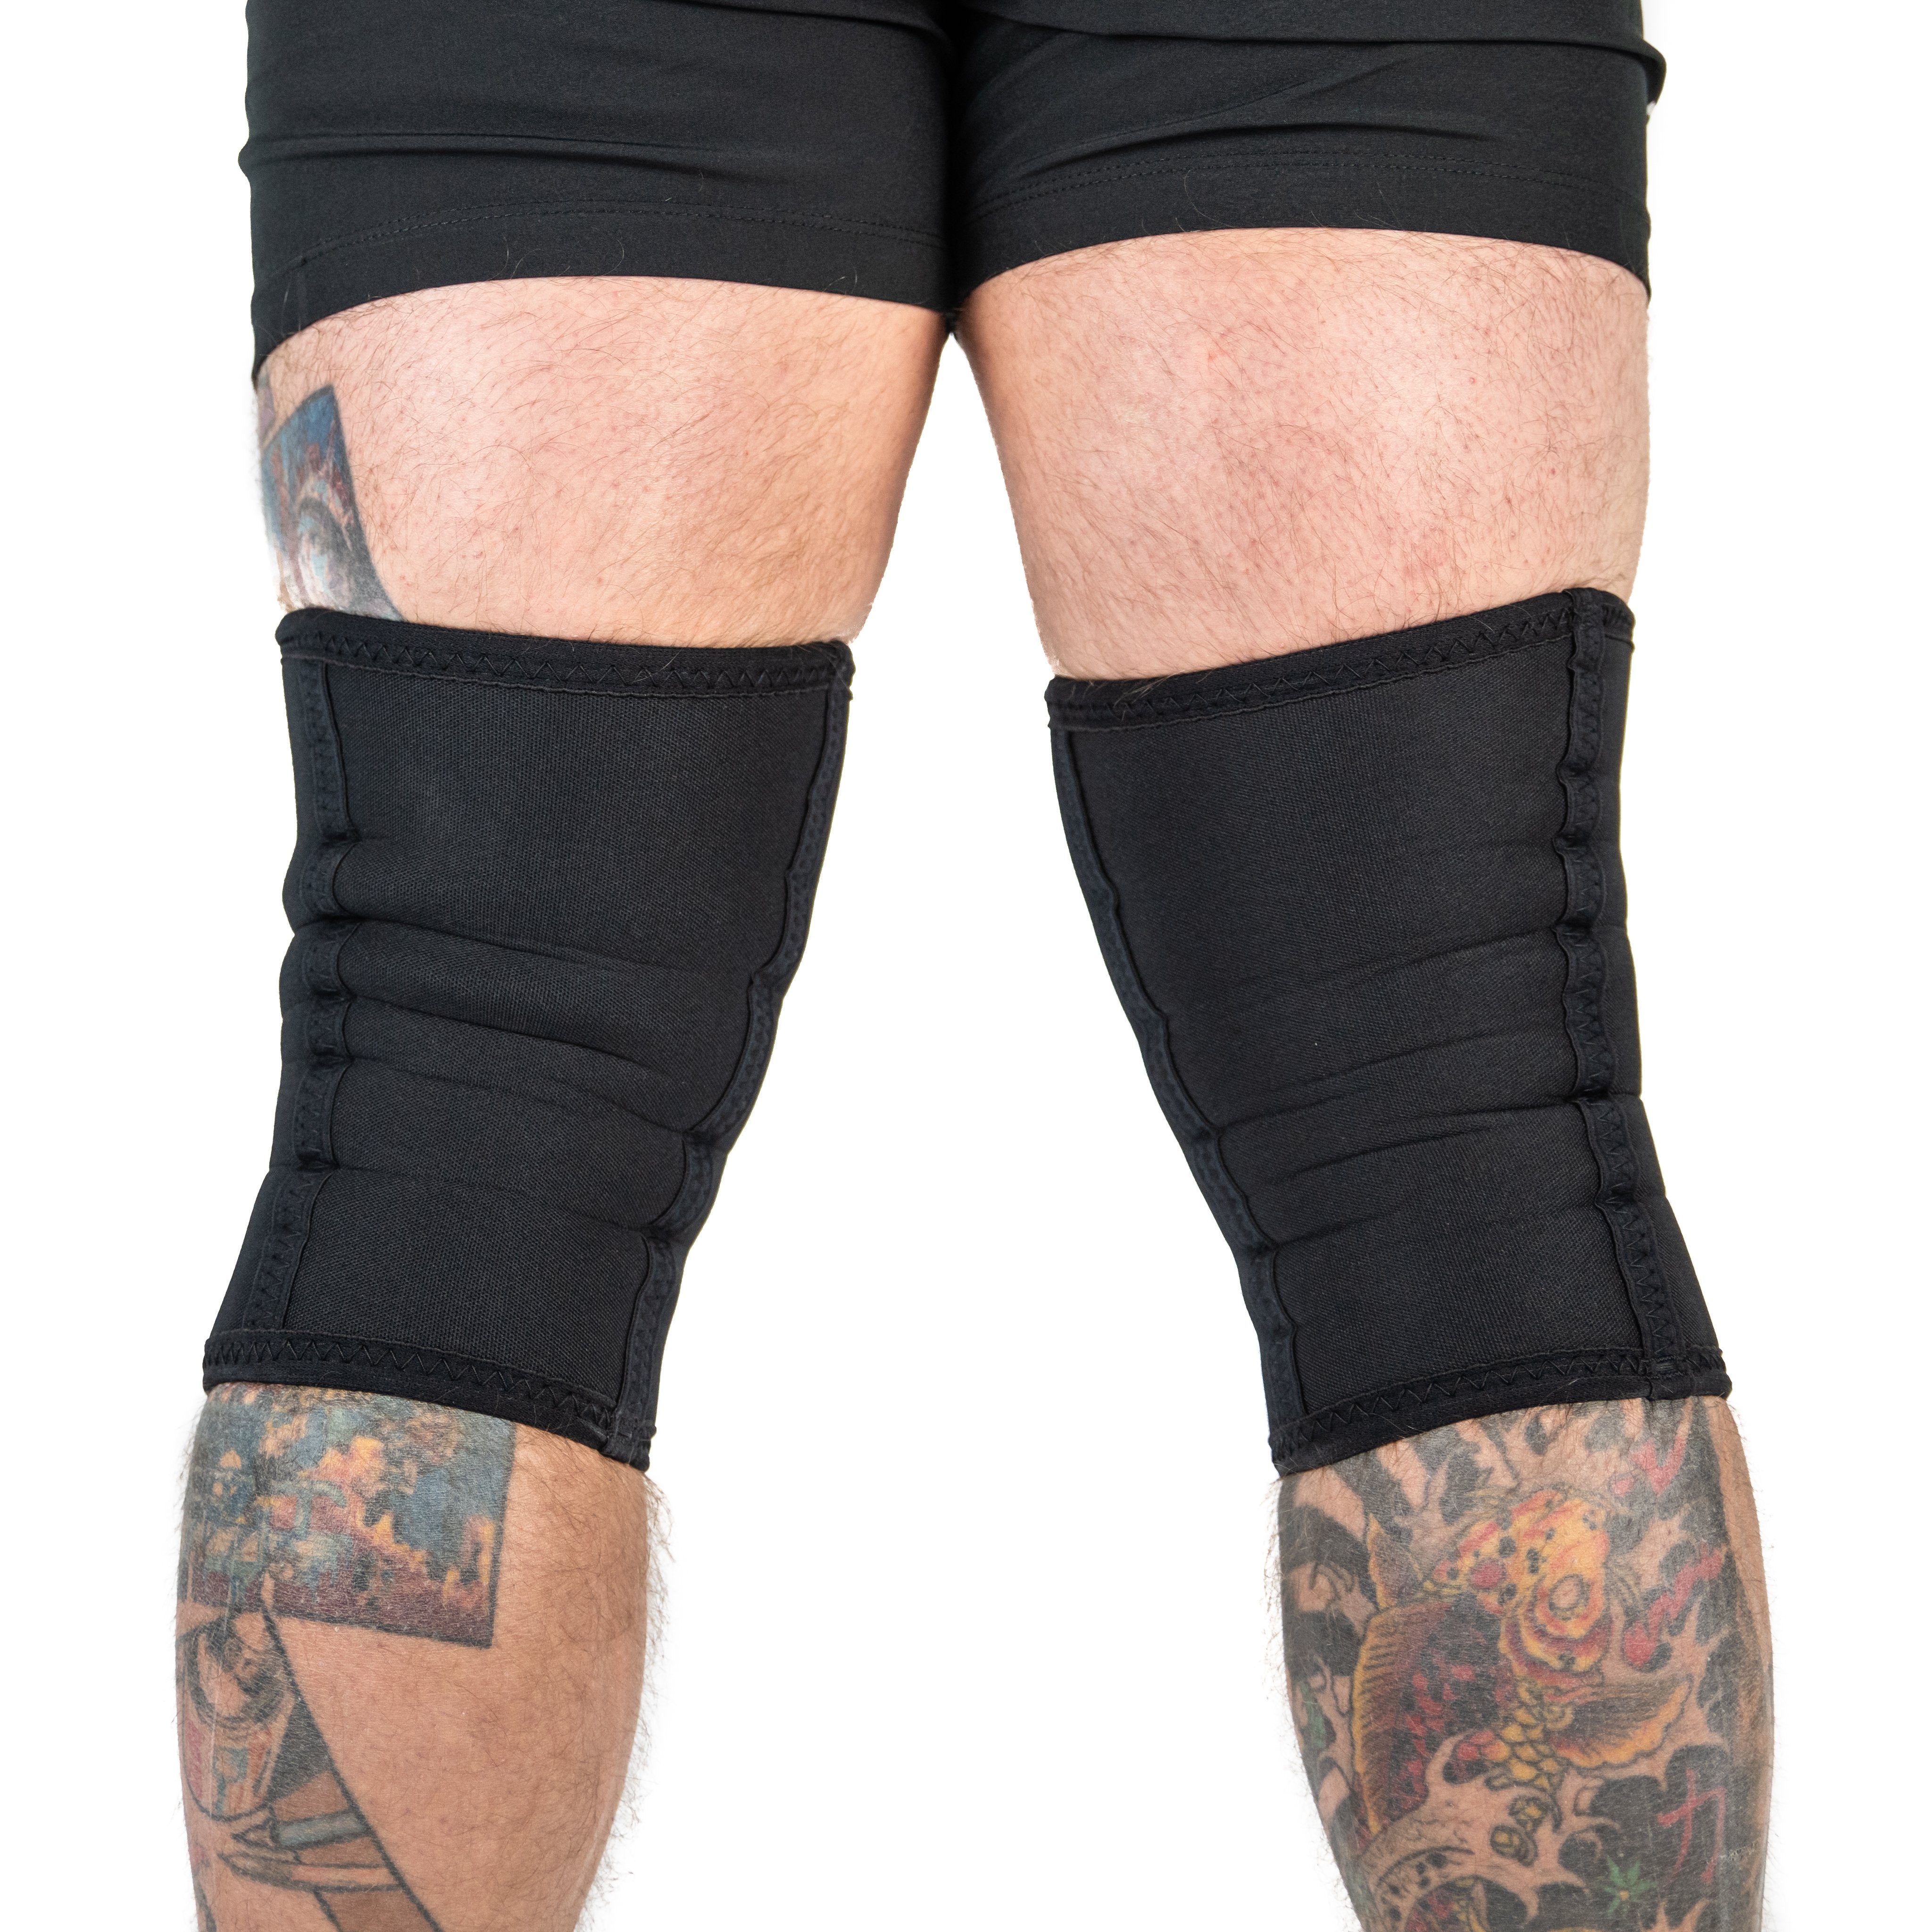 A7 Stealth Stiff knee sleeves are structured with a downward cut panel on the back of the quad and calf to ensure these have the ultimate compression at the knee joint. A7 CONE knee sleeves are IPF approved. Available in UK and Europe including France, Italy, Germany, Sweden and Poland.